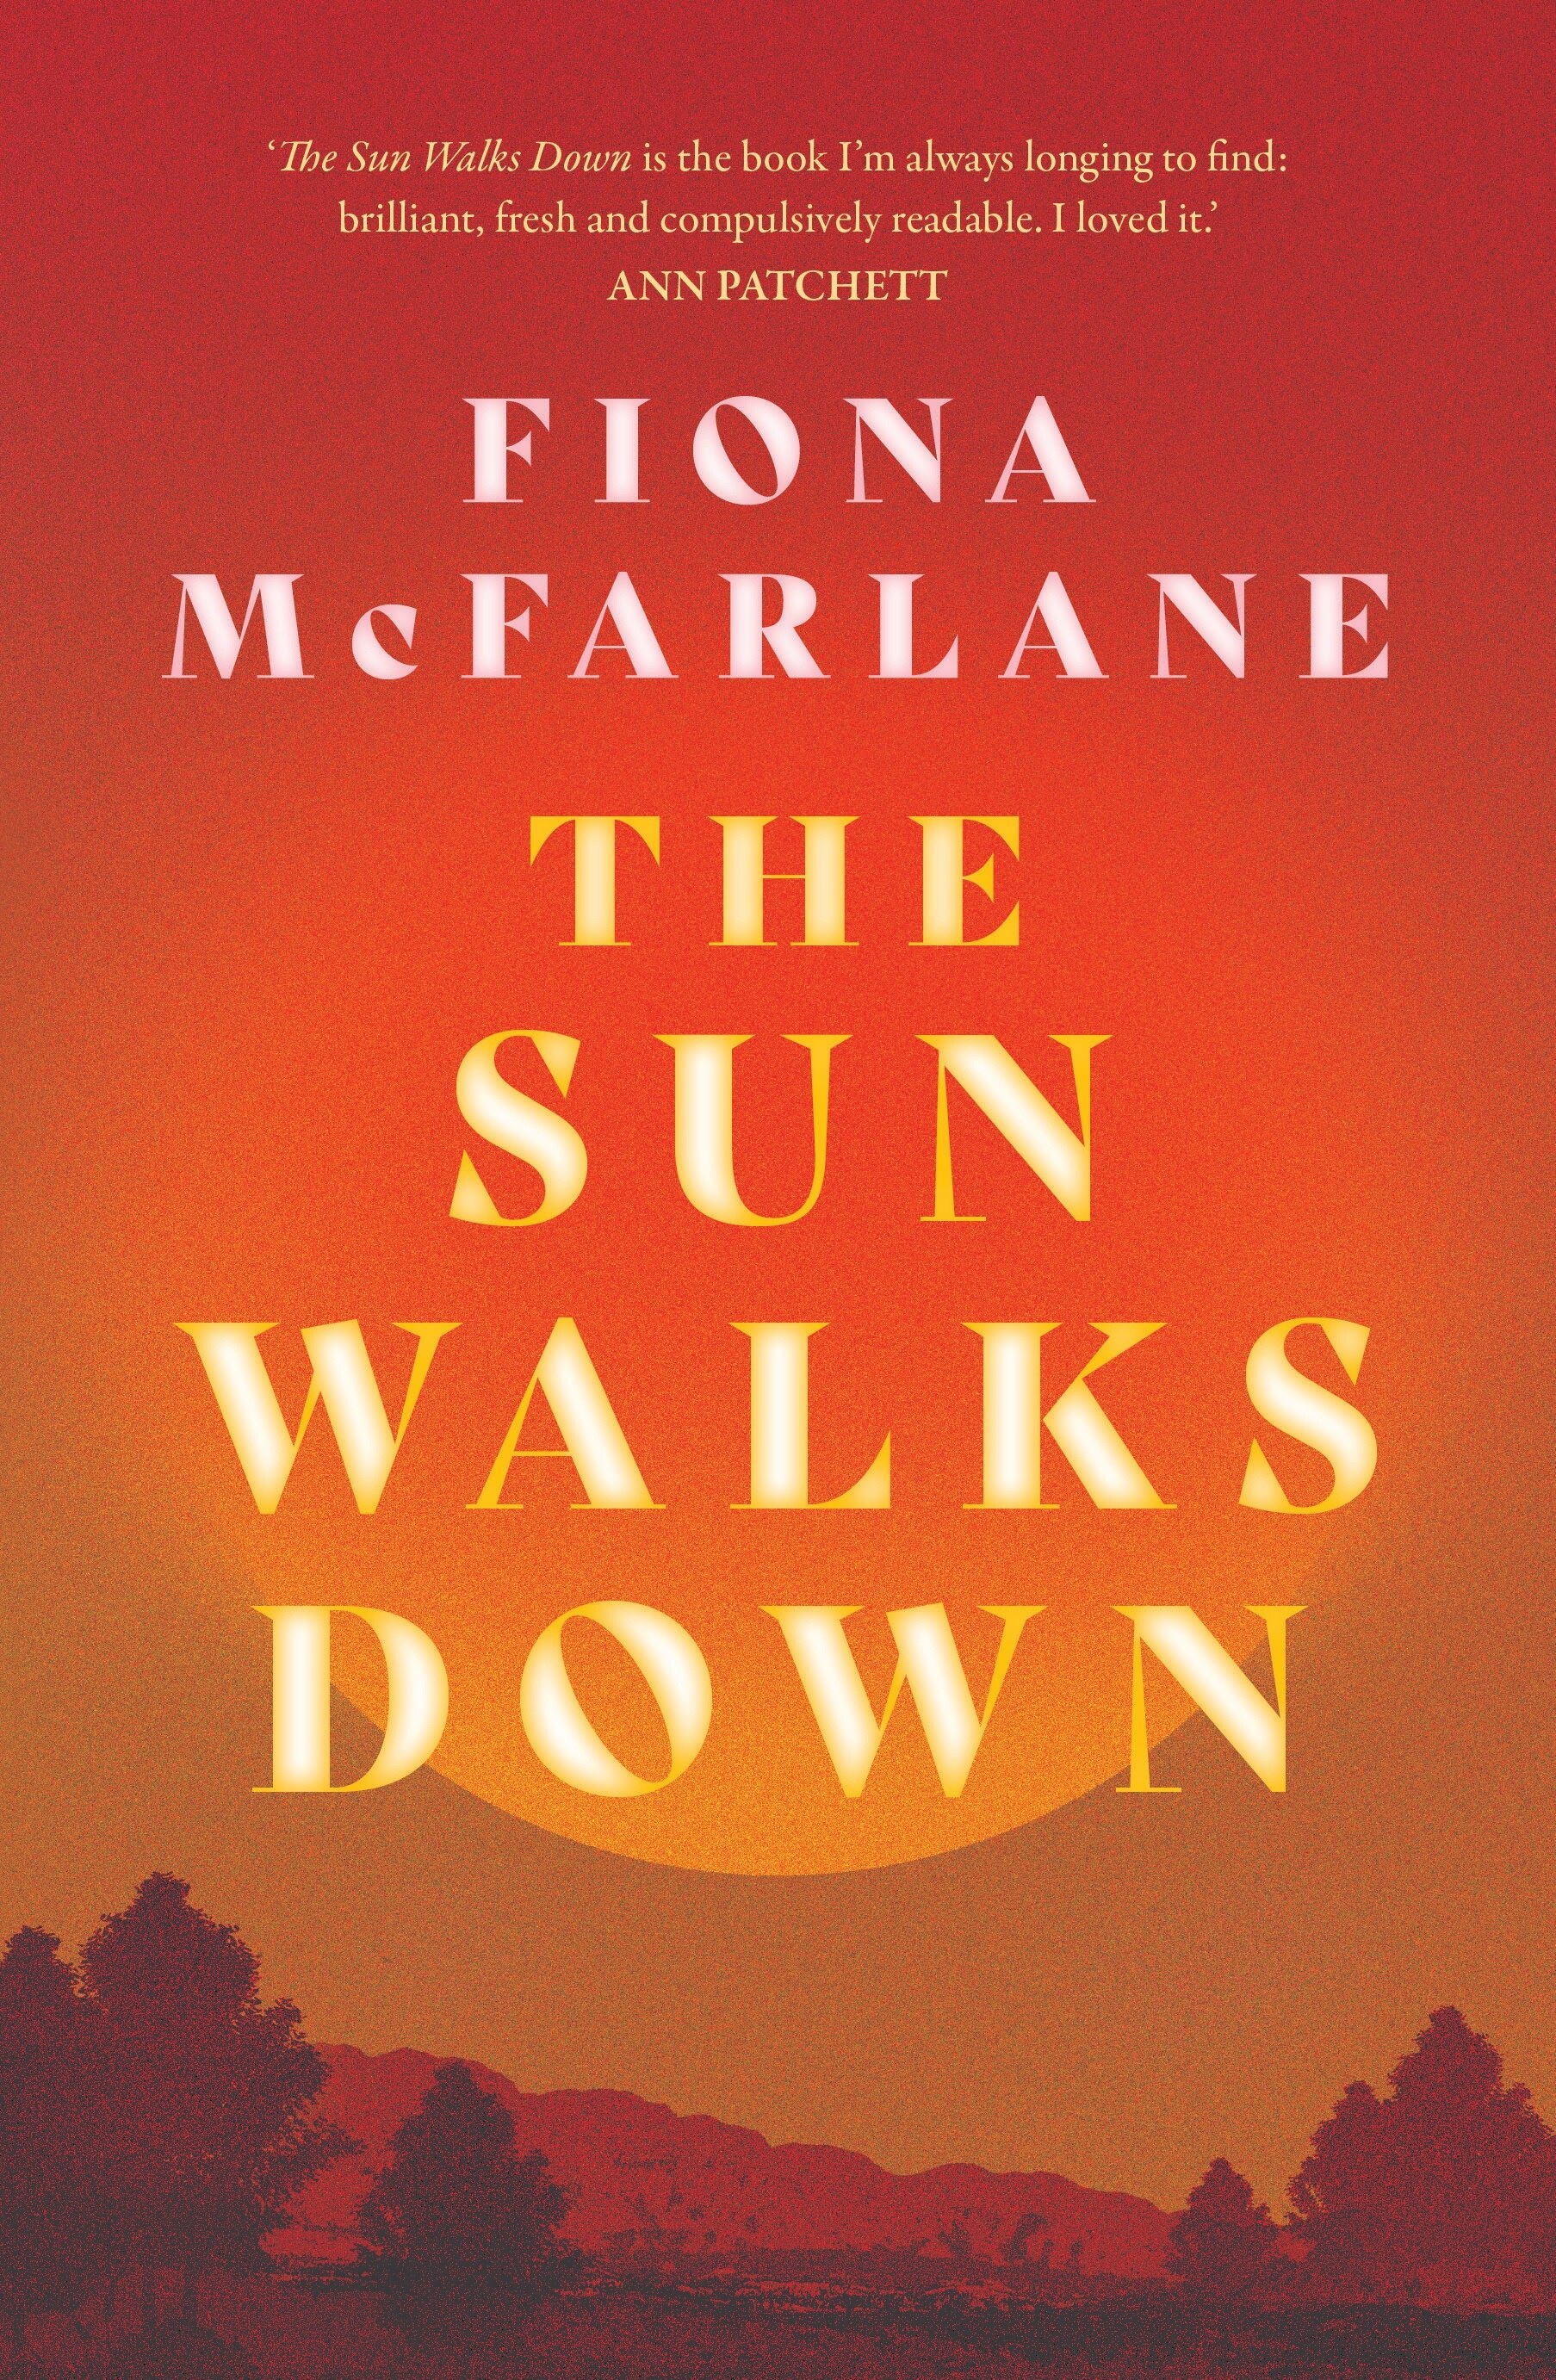 A book cover showing a glowing orange sun